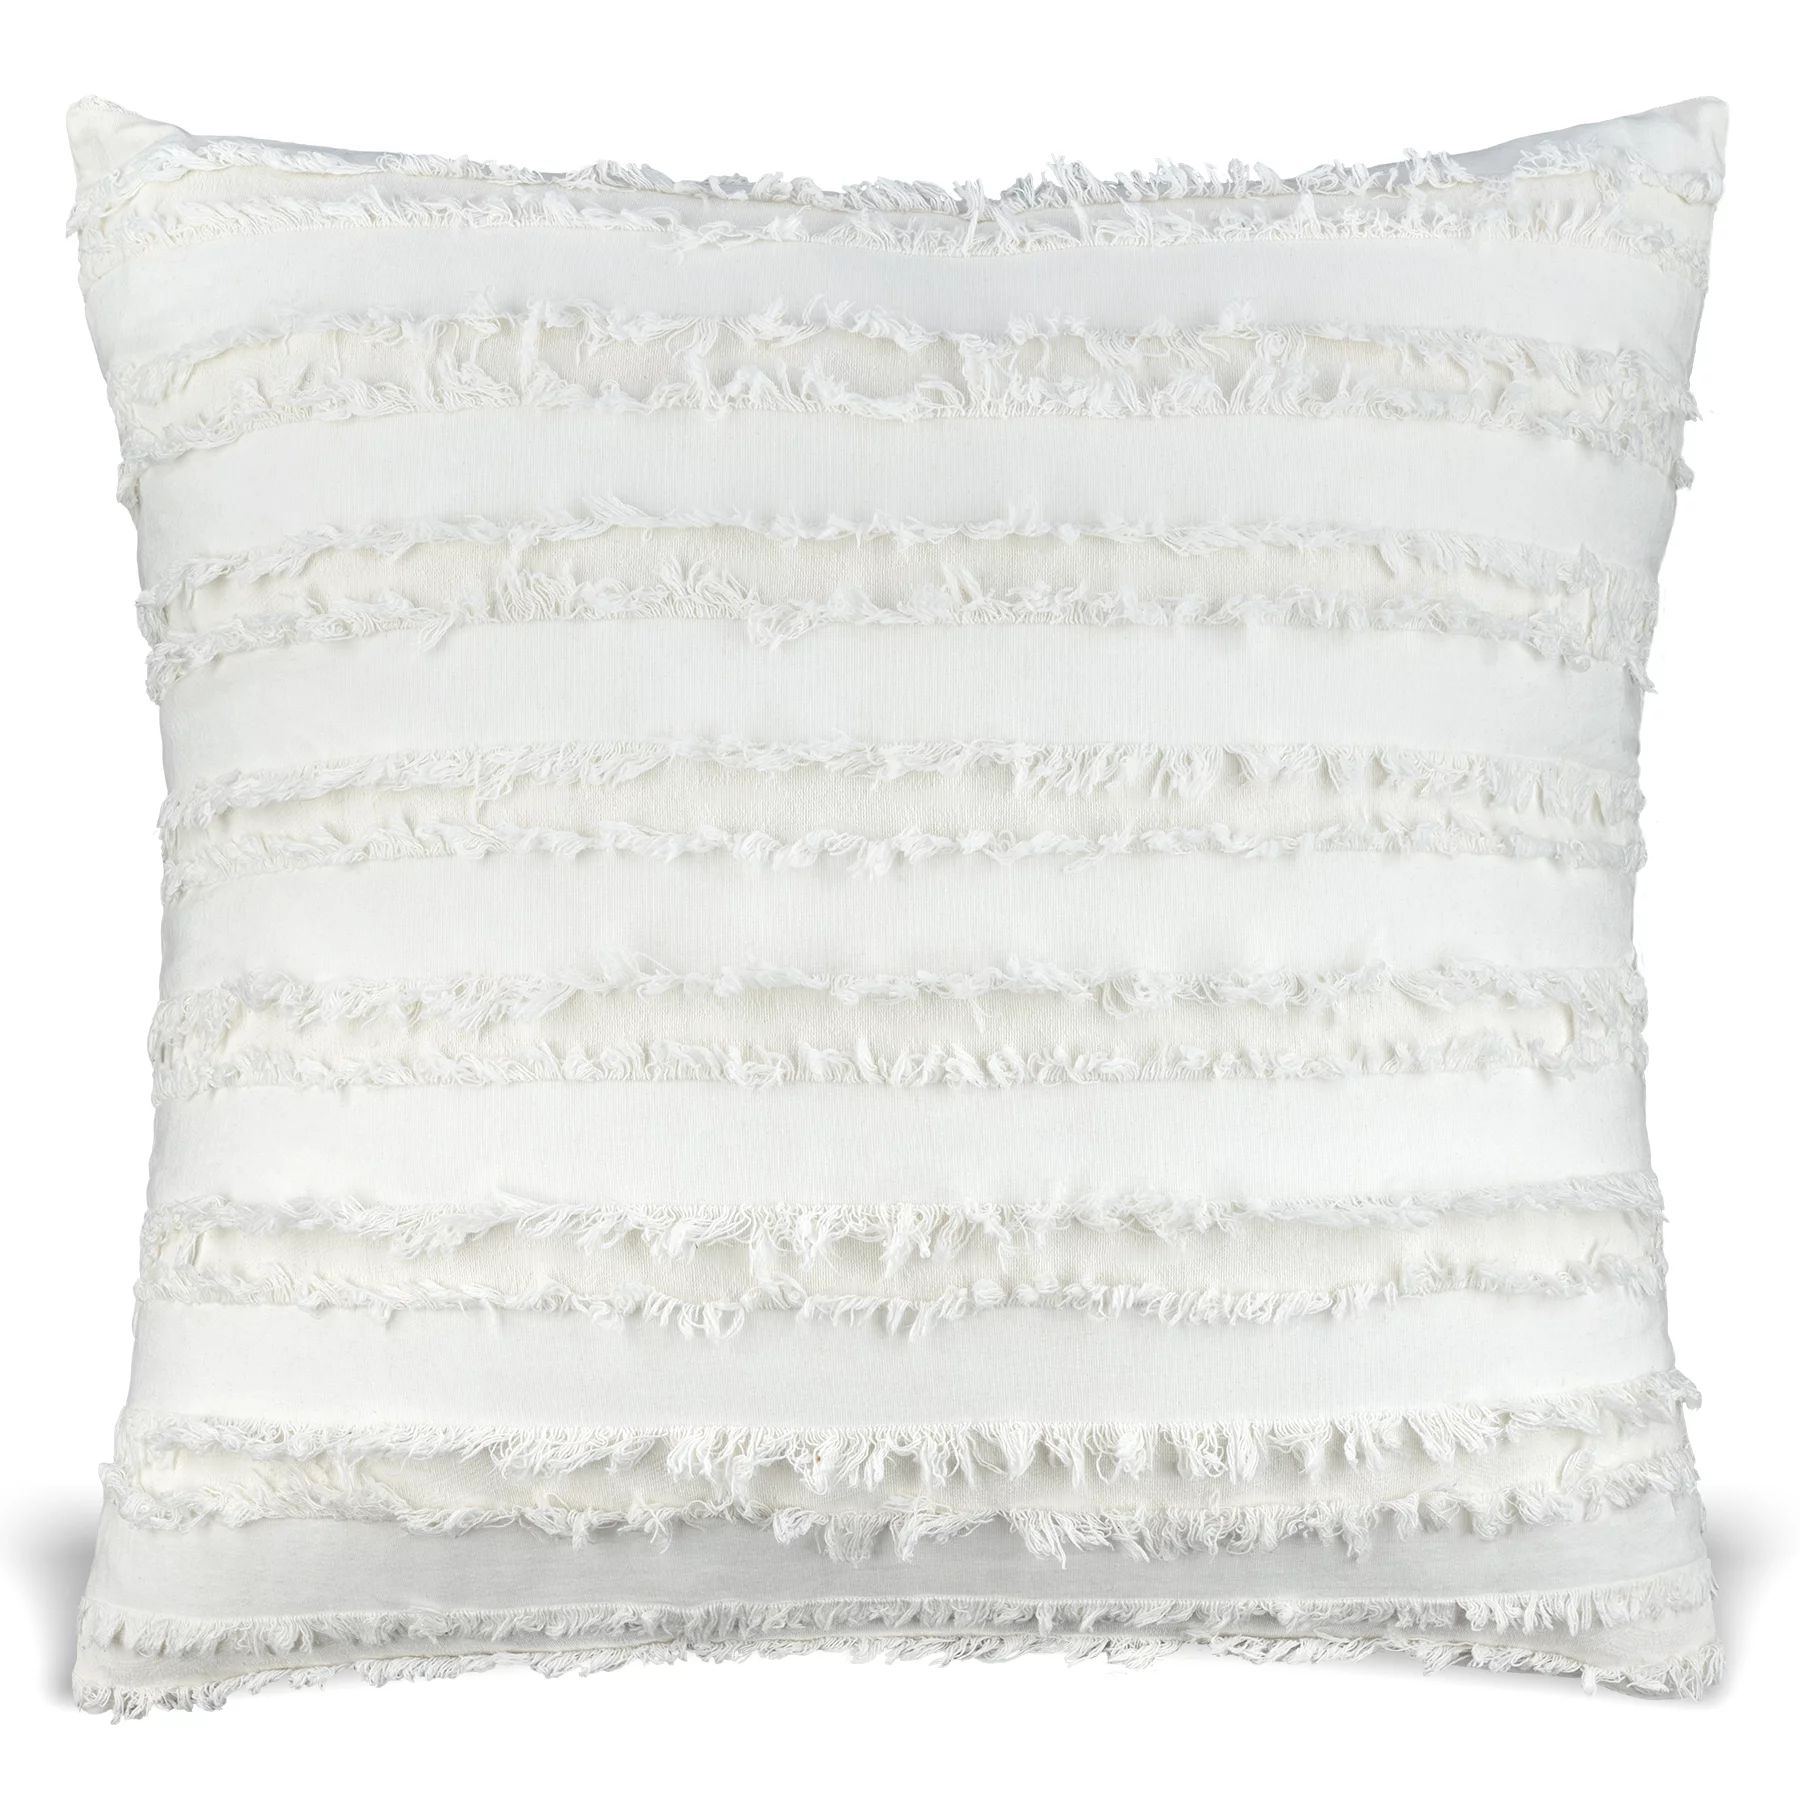 MAUBY HOME Solid Cotton Washed & Frayed Cream Boho Square Pillow, Throw Pillow Cover for Bedroom ... | Walmart (US)